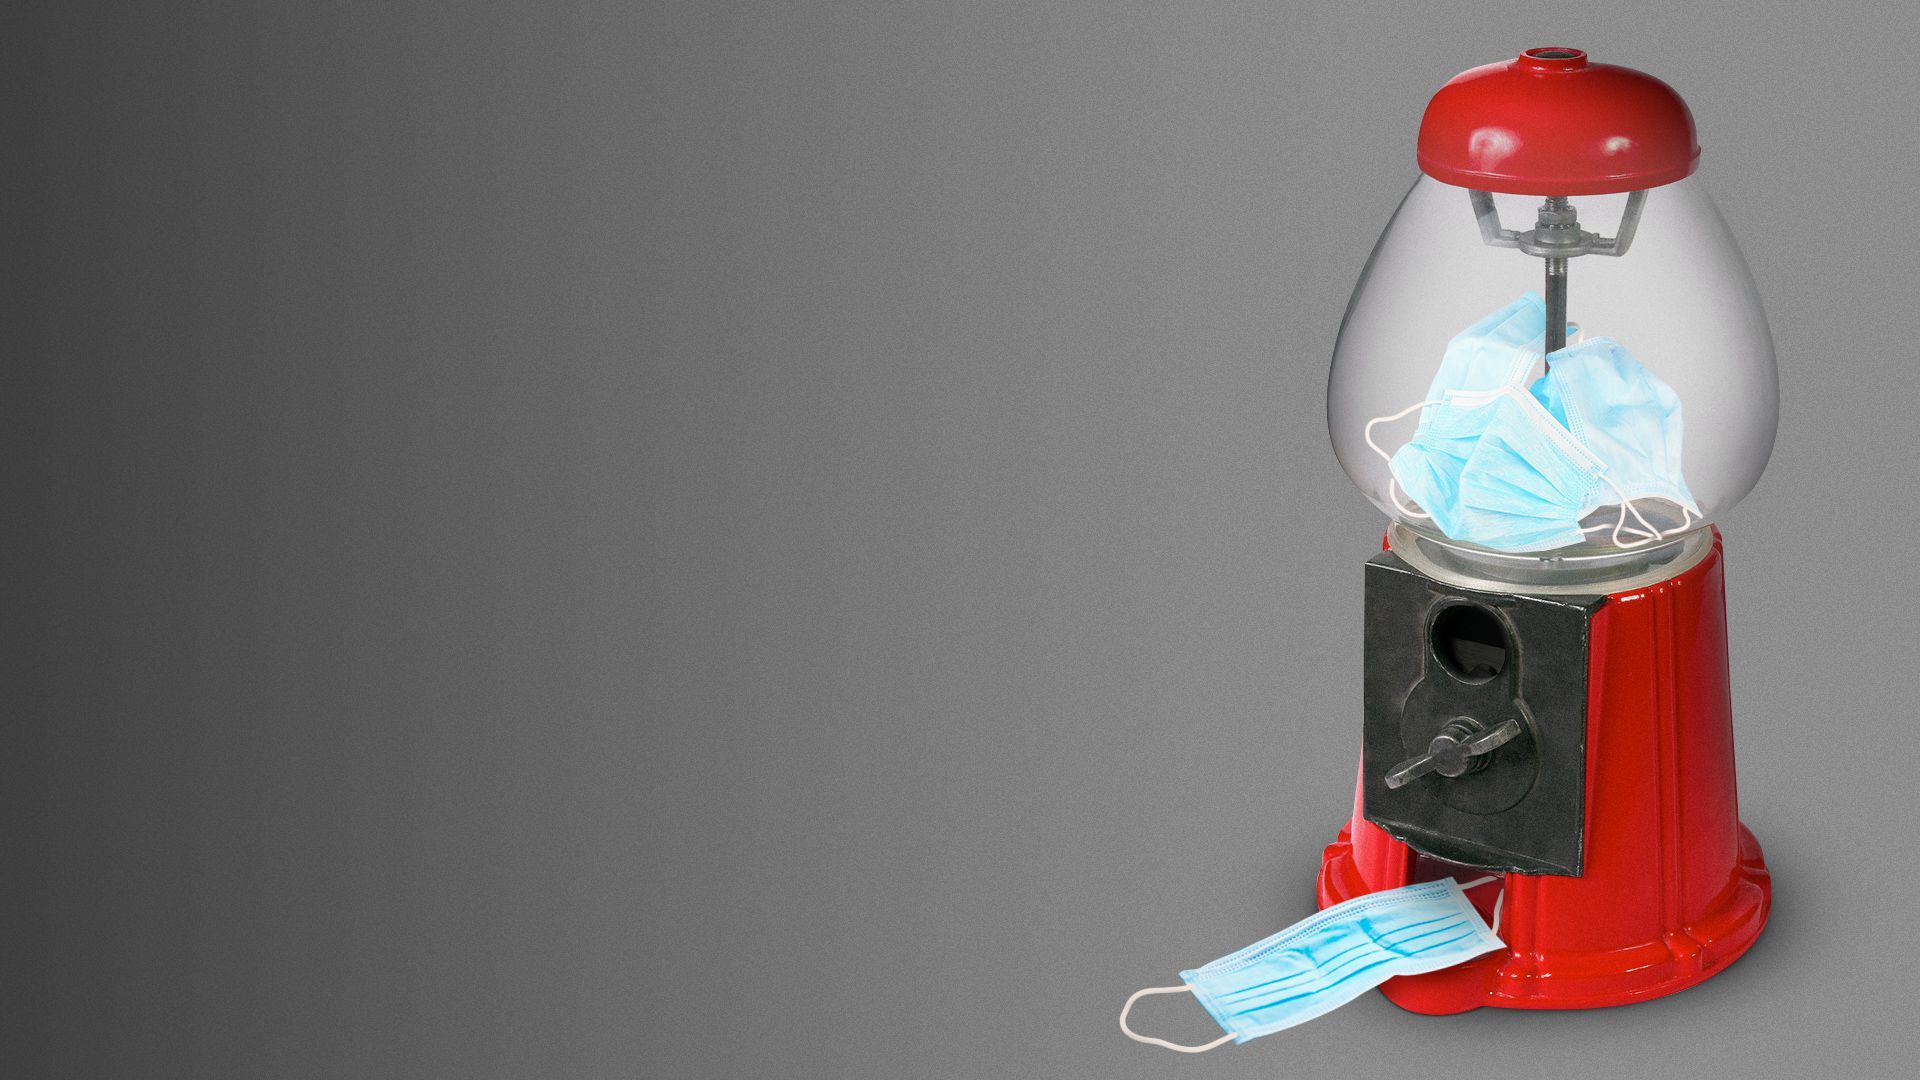 Illustration of a gumball machine with a low supply of surgical masks.